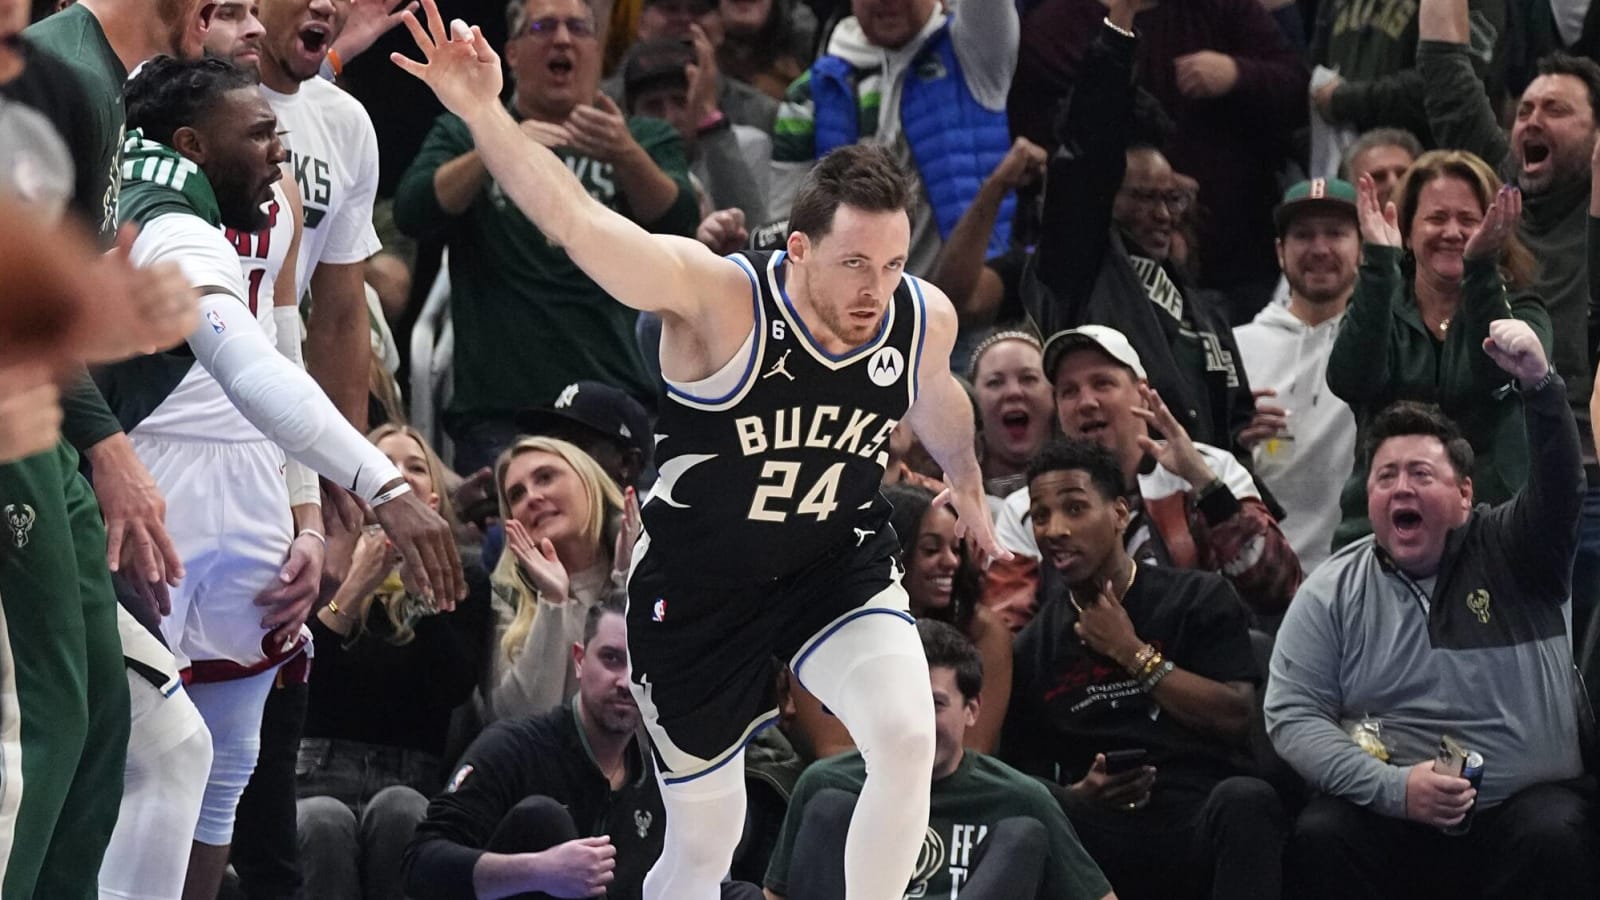 Bucks tie playoff record in blowout win over Heat